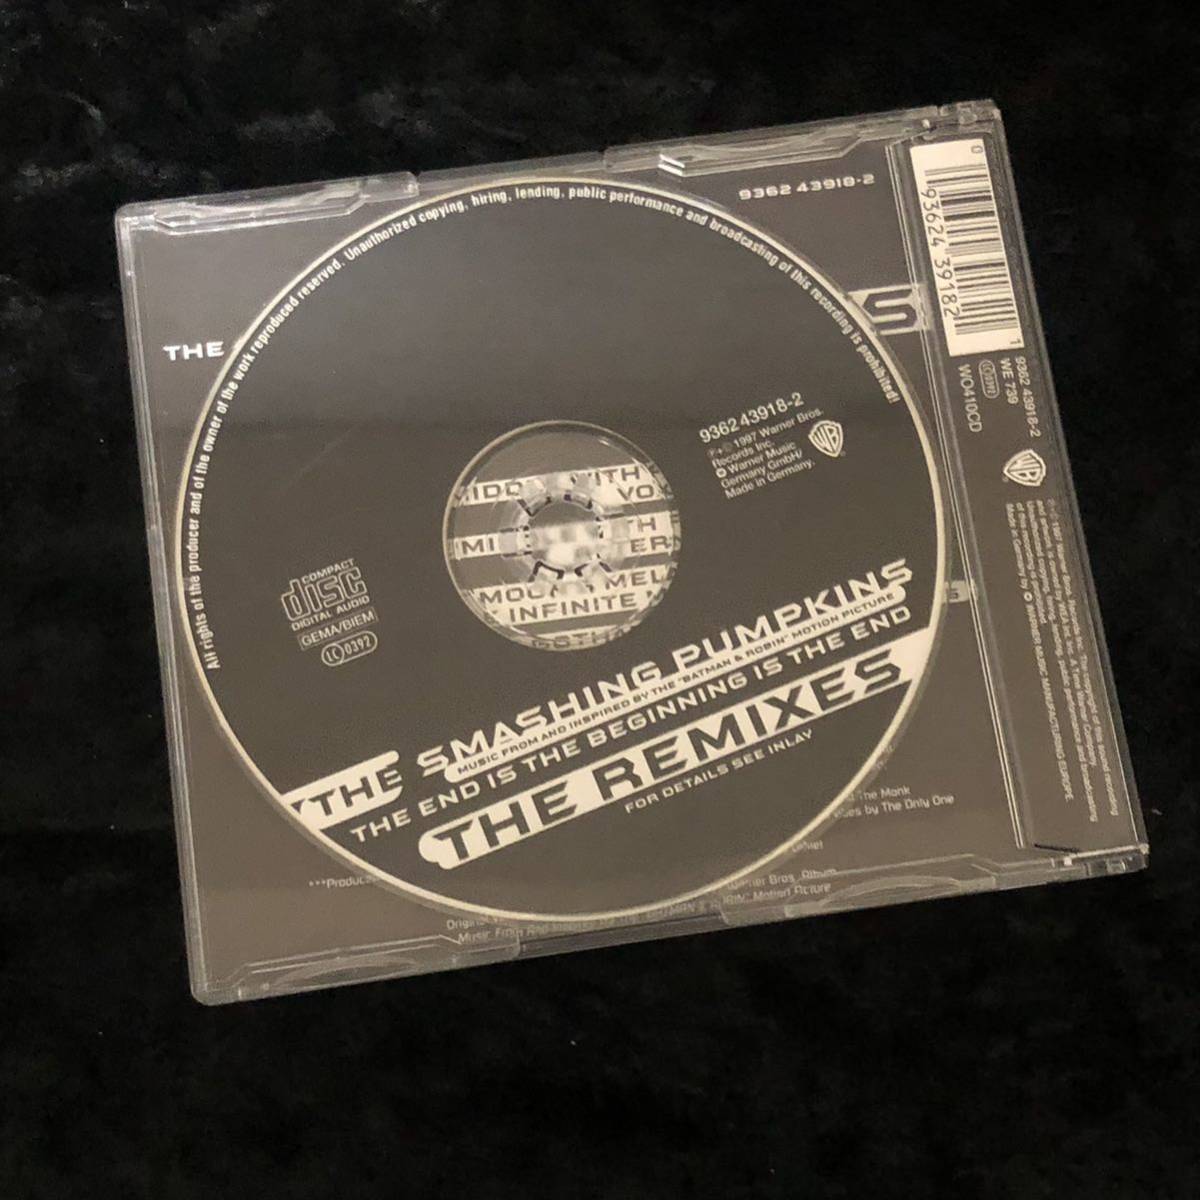 THE SMASHING PUMPKINS - THE END IS THE BEGINING IS THE END THE REMIXES (LIMITED EDITION CD)_画像4